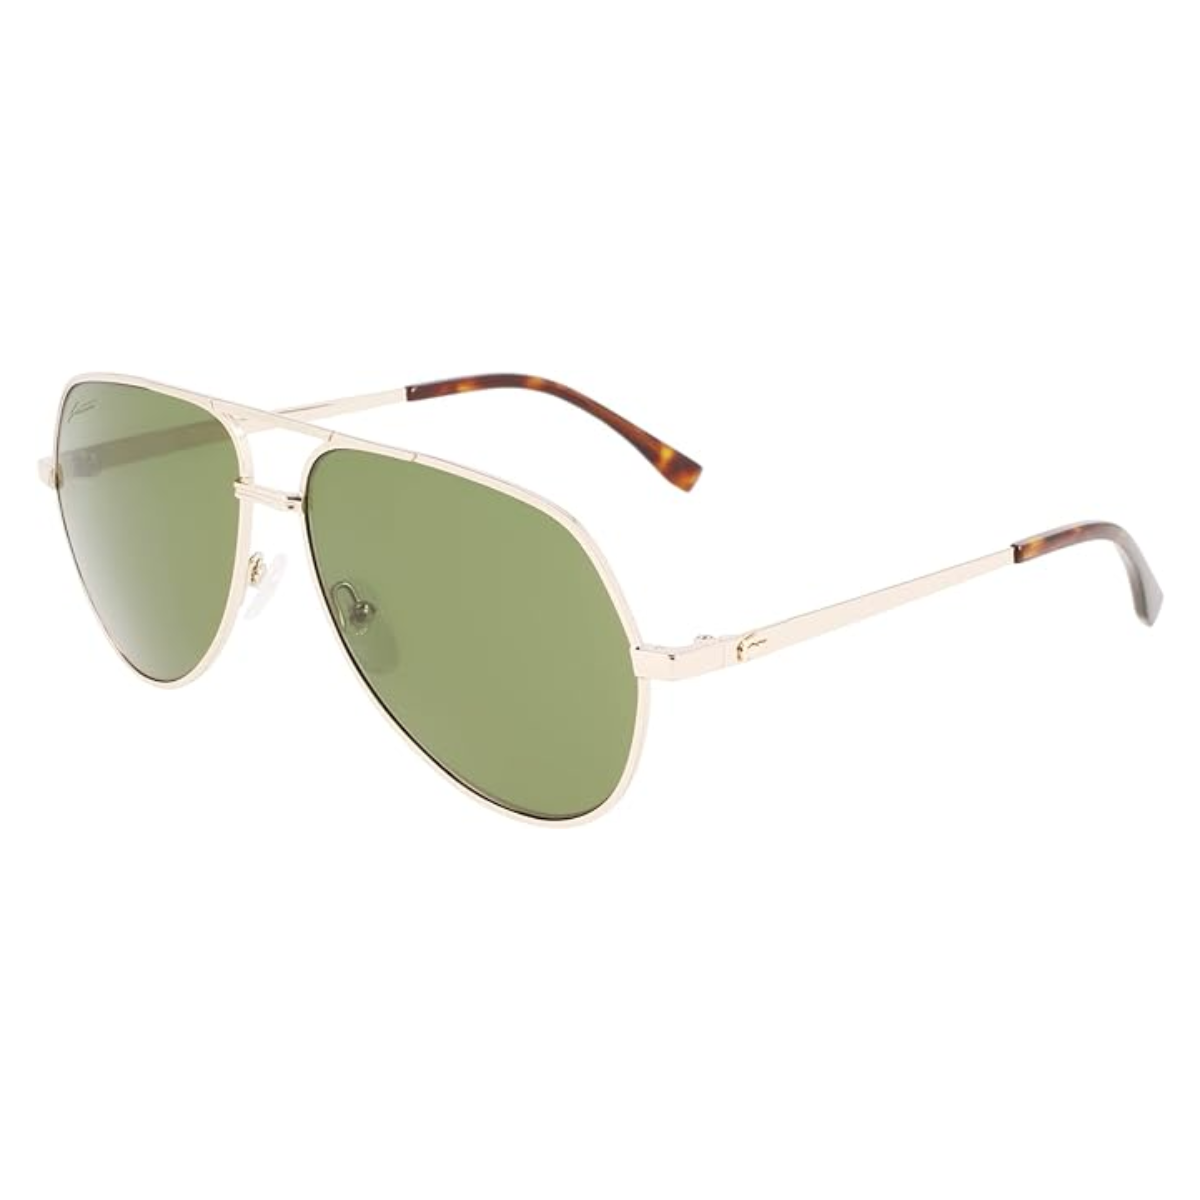 "Discover Lacoste 250SE Sunglass: Aviator shapes, top brands, non-polarized lenses. Elevate your style with Optorium's sunglasses for men and women."